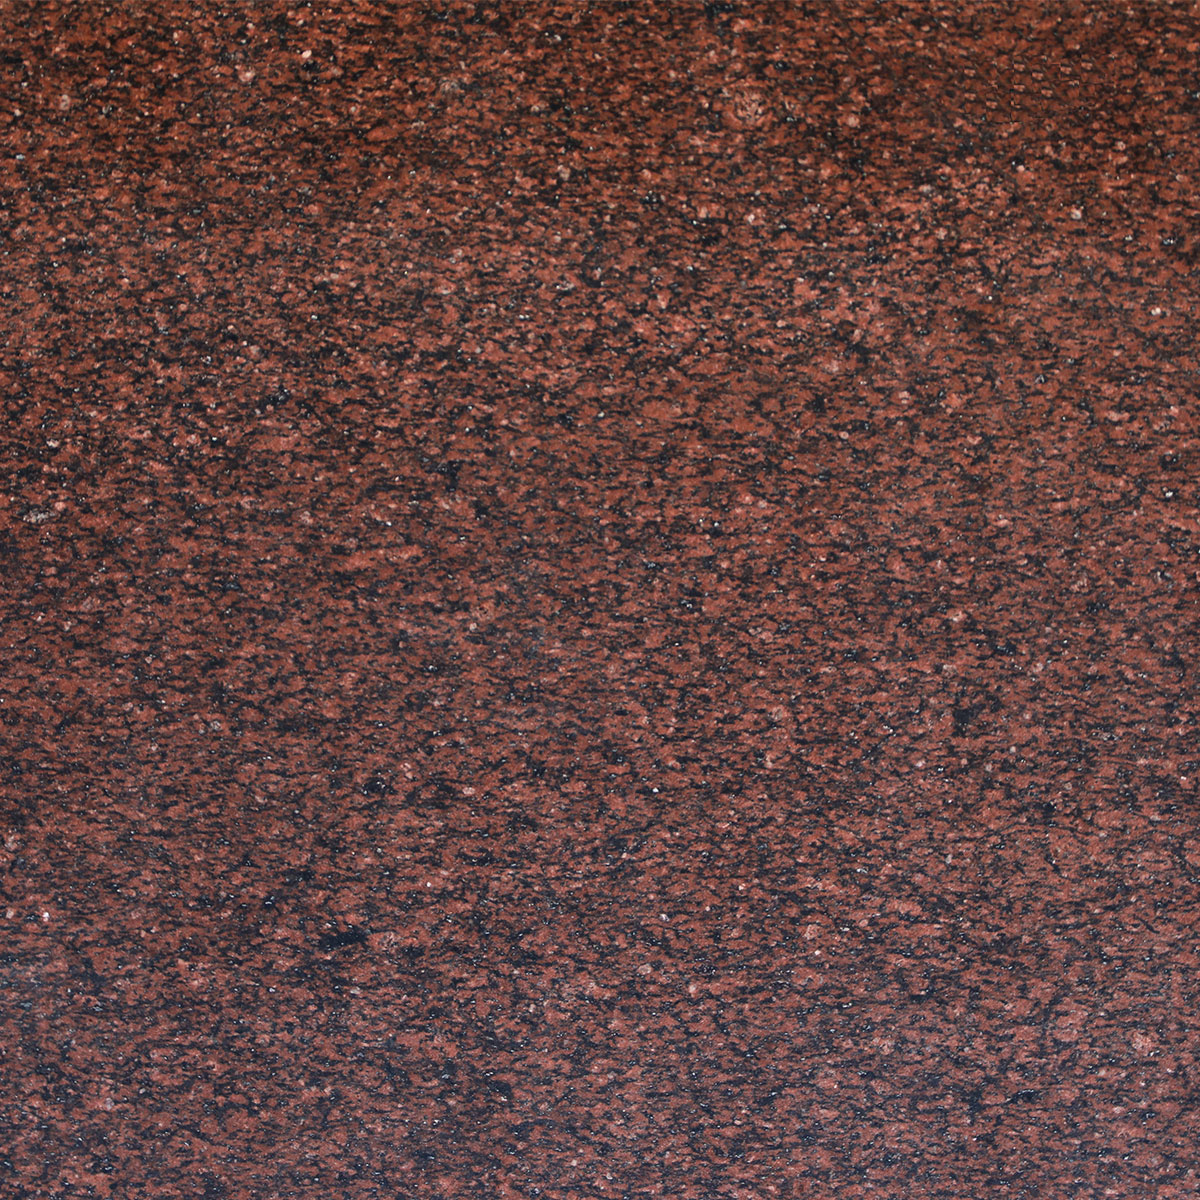 static/products/marbleSlabs/products/GBR10.jpg 